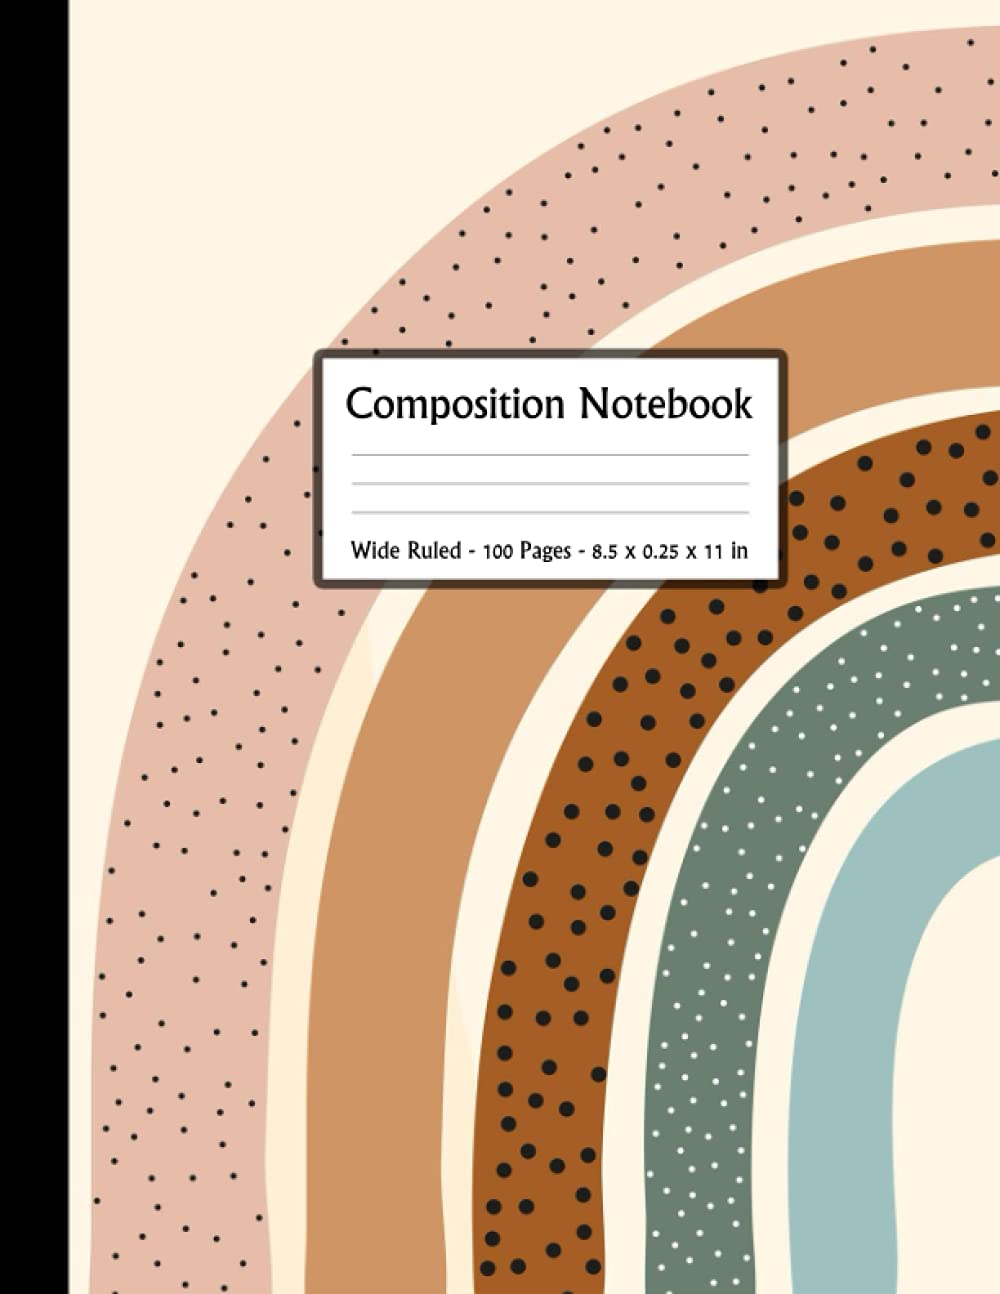 Composition Notebook Aesthetic: Boho Burnt Orange Half Rainbow With Polka Dot Pattern|Notebook for School, Girls, Boys, College Students, Kids, Elementary School and Note Taking